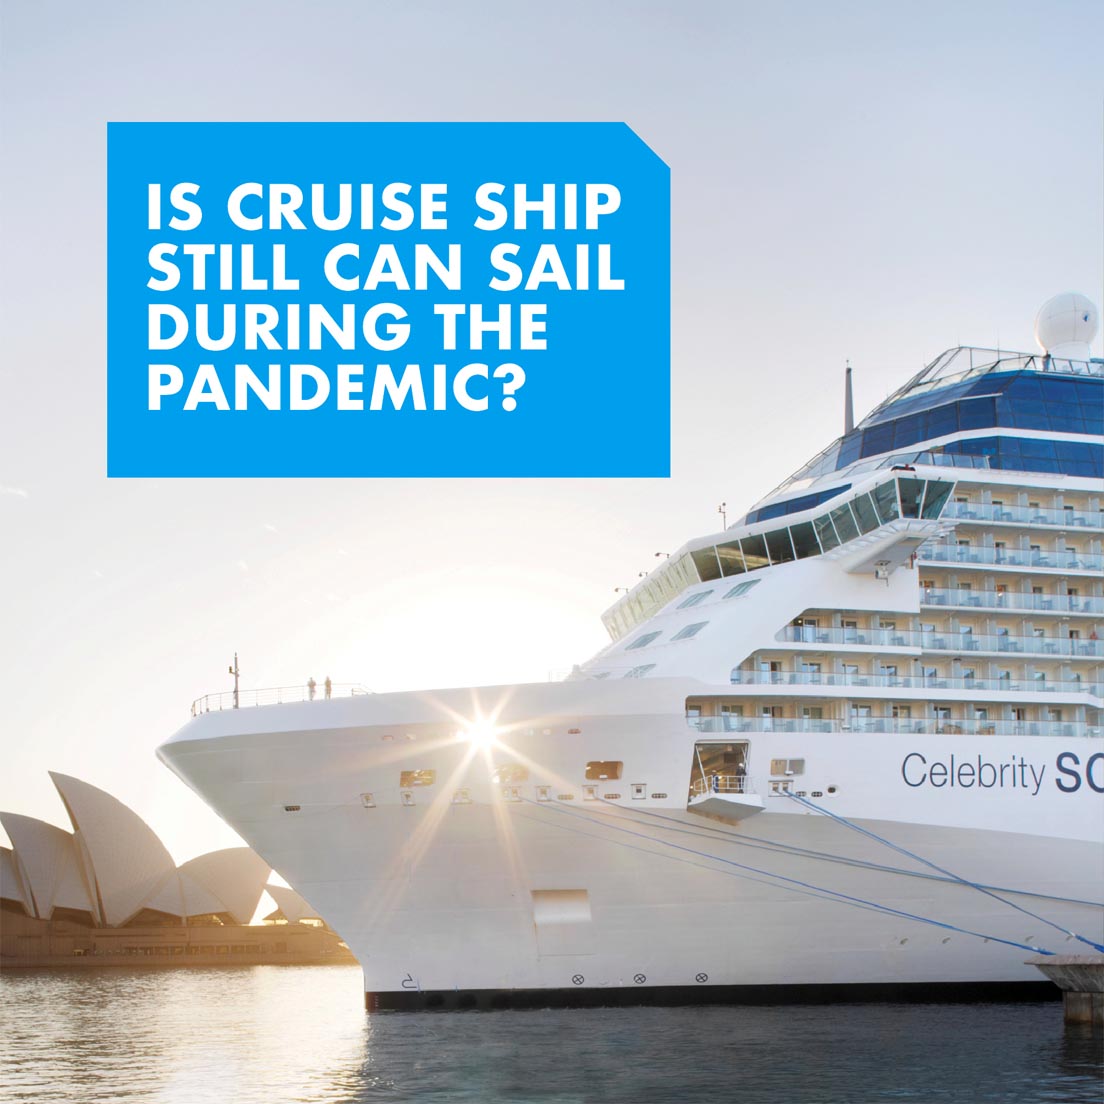 Is Cruise Ship Still Can Sail During The Pandemic?